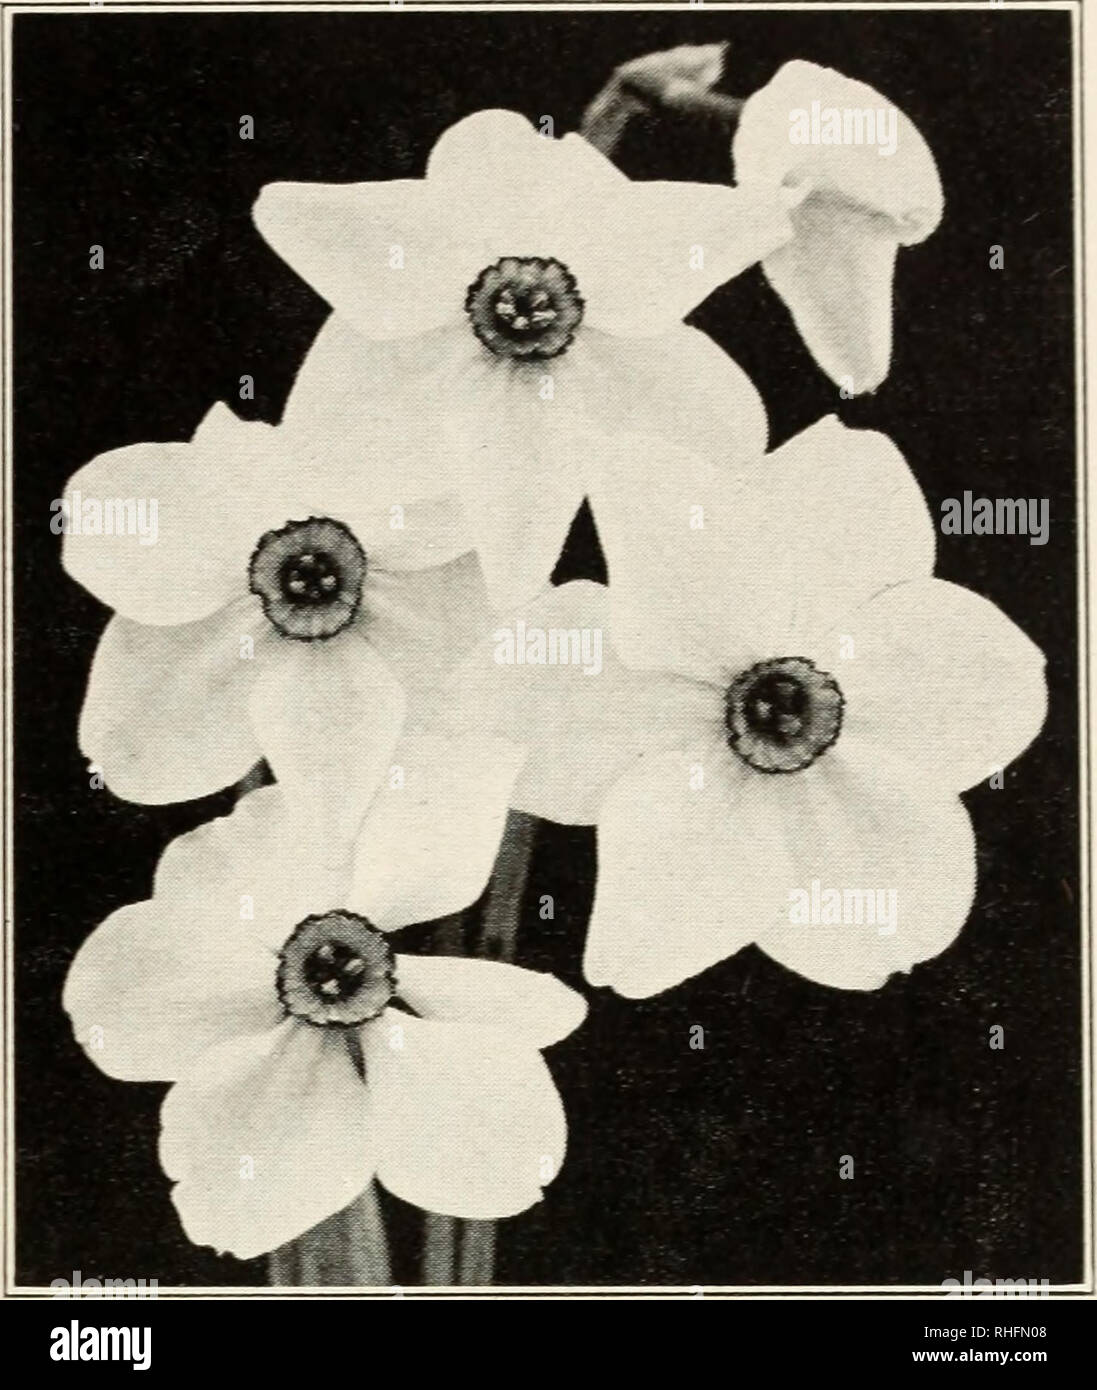 . Bolgiano's bulbs plants seeds for fall planting 1938. Nurseries (Horticulture) Catalogs; Bulbs (Plants) Catalogs; Seeds Catalogs. F. W. BOLGIANO &amp; CO., WASHINGTON, D. C. 11 Narcissus -^ Jonquils INCOMPARABILIS NARCISSUS CROESUS. A most striking Daffo- dil. Round imbricated Primrose per- ianth with widely expanded deep red crown. Height 16 inches. 12 cts. each; $1.20 doz.; $9.00 per 100. WILL SCARLETT. A cream colored perianth supporting a fine cup, ex- quisitely frilled, of wonderful orange- scarlet. Splendid for the garden be- cause it holds its color nicely and is persistently hardy ;  Stock Photo